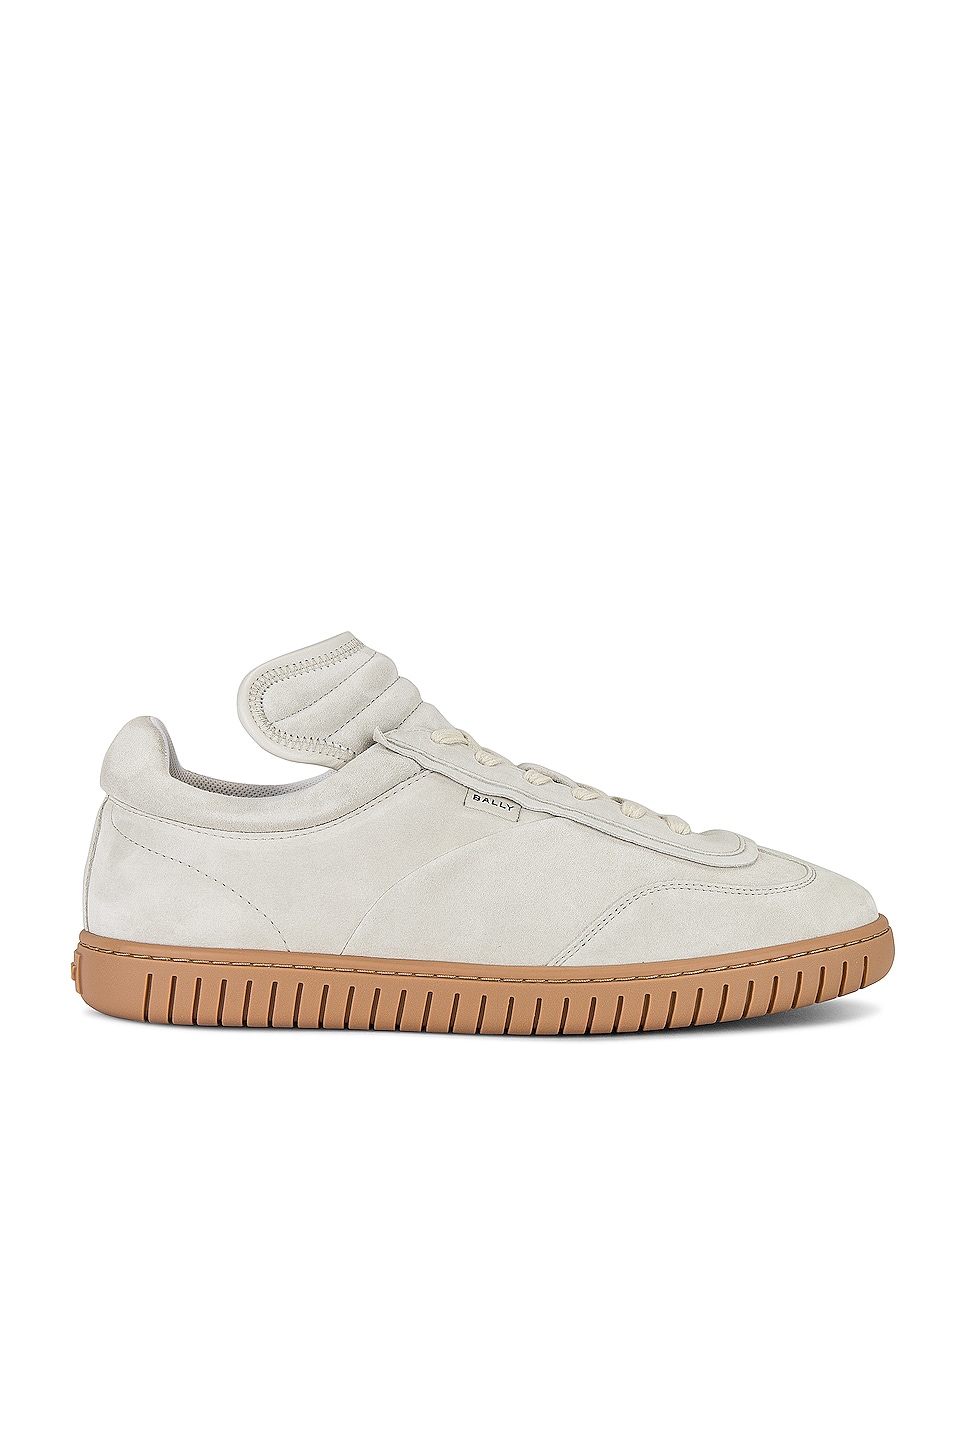 Image 1 of Bally Parrel Sneakers in Dustywhite & Ambra